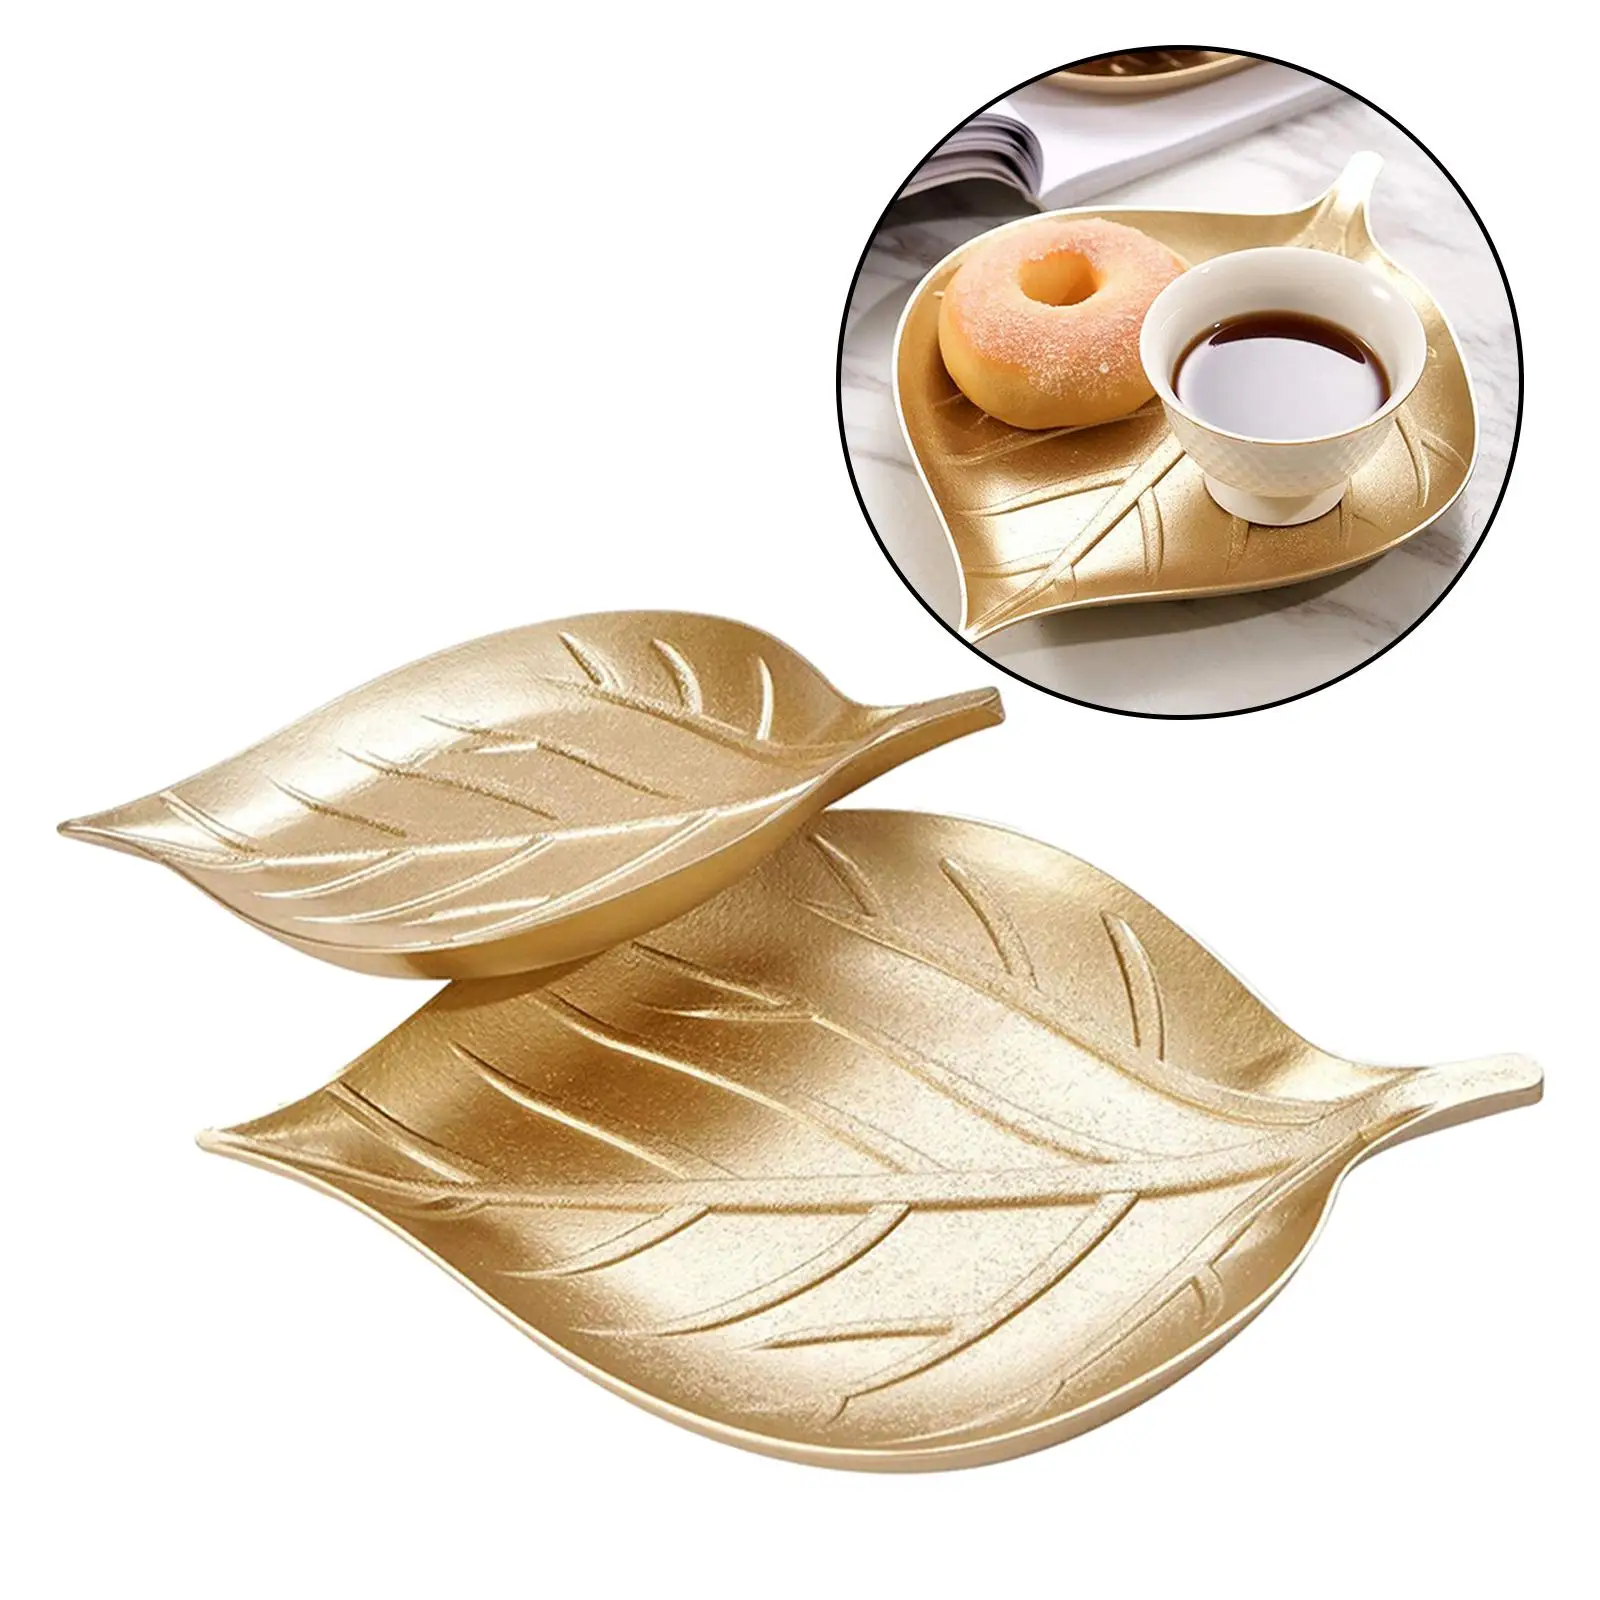 Storage Tray Jewelry Display Holder Home Accessories Decorative Tray Plate for Cosmetic Desktop Decoration Bedroom